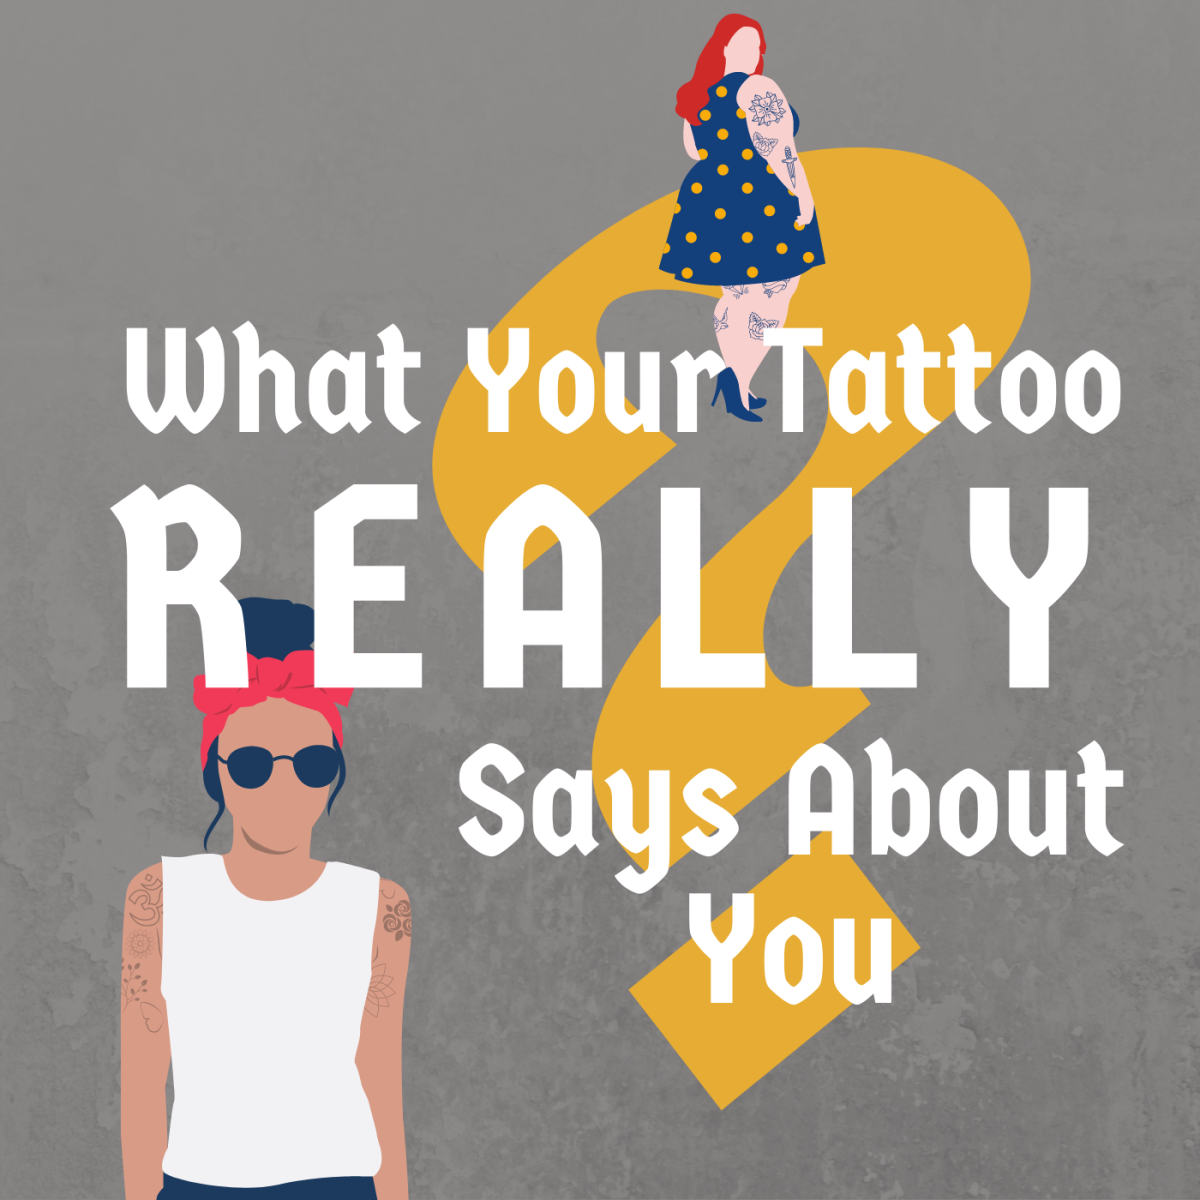 What Does a Tattoo REALLY Say About You?